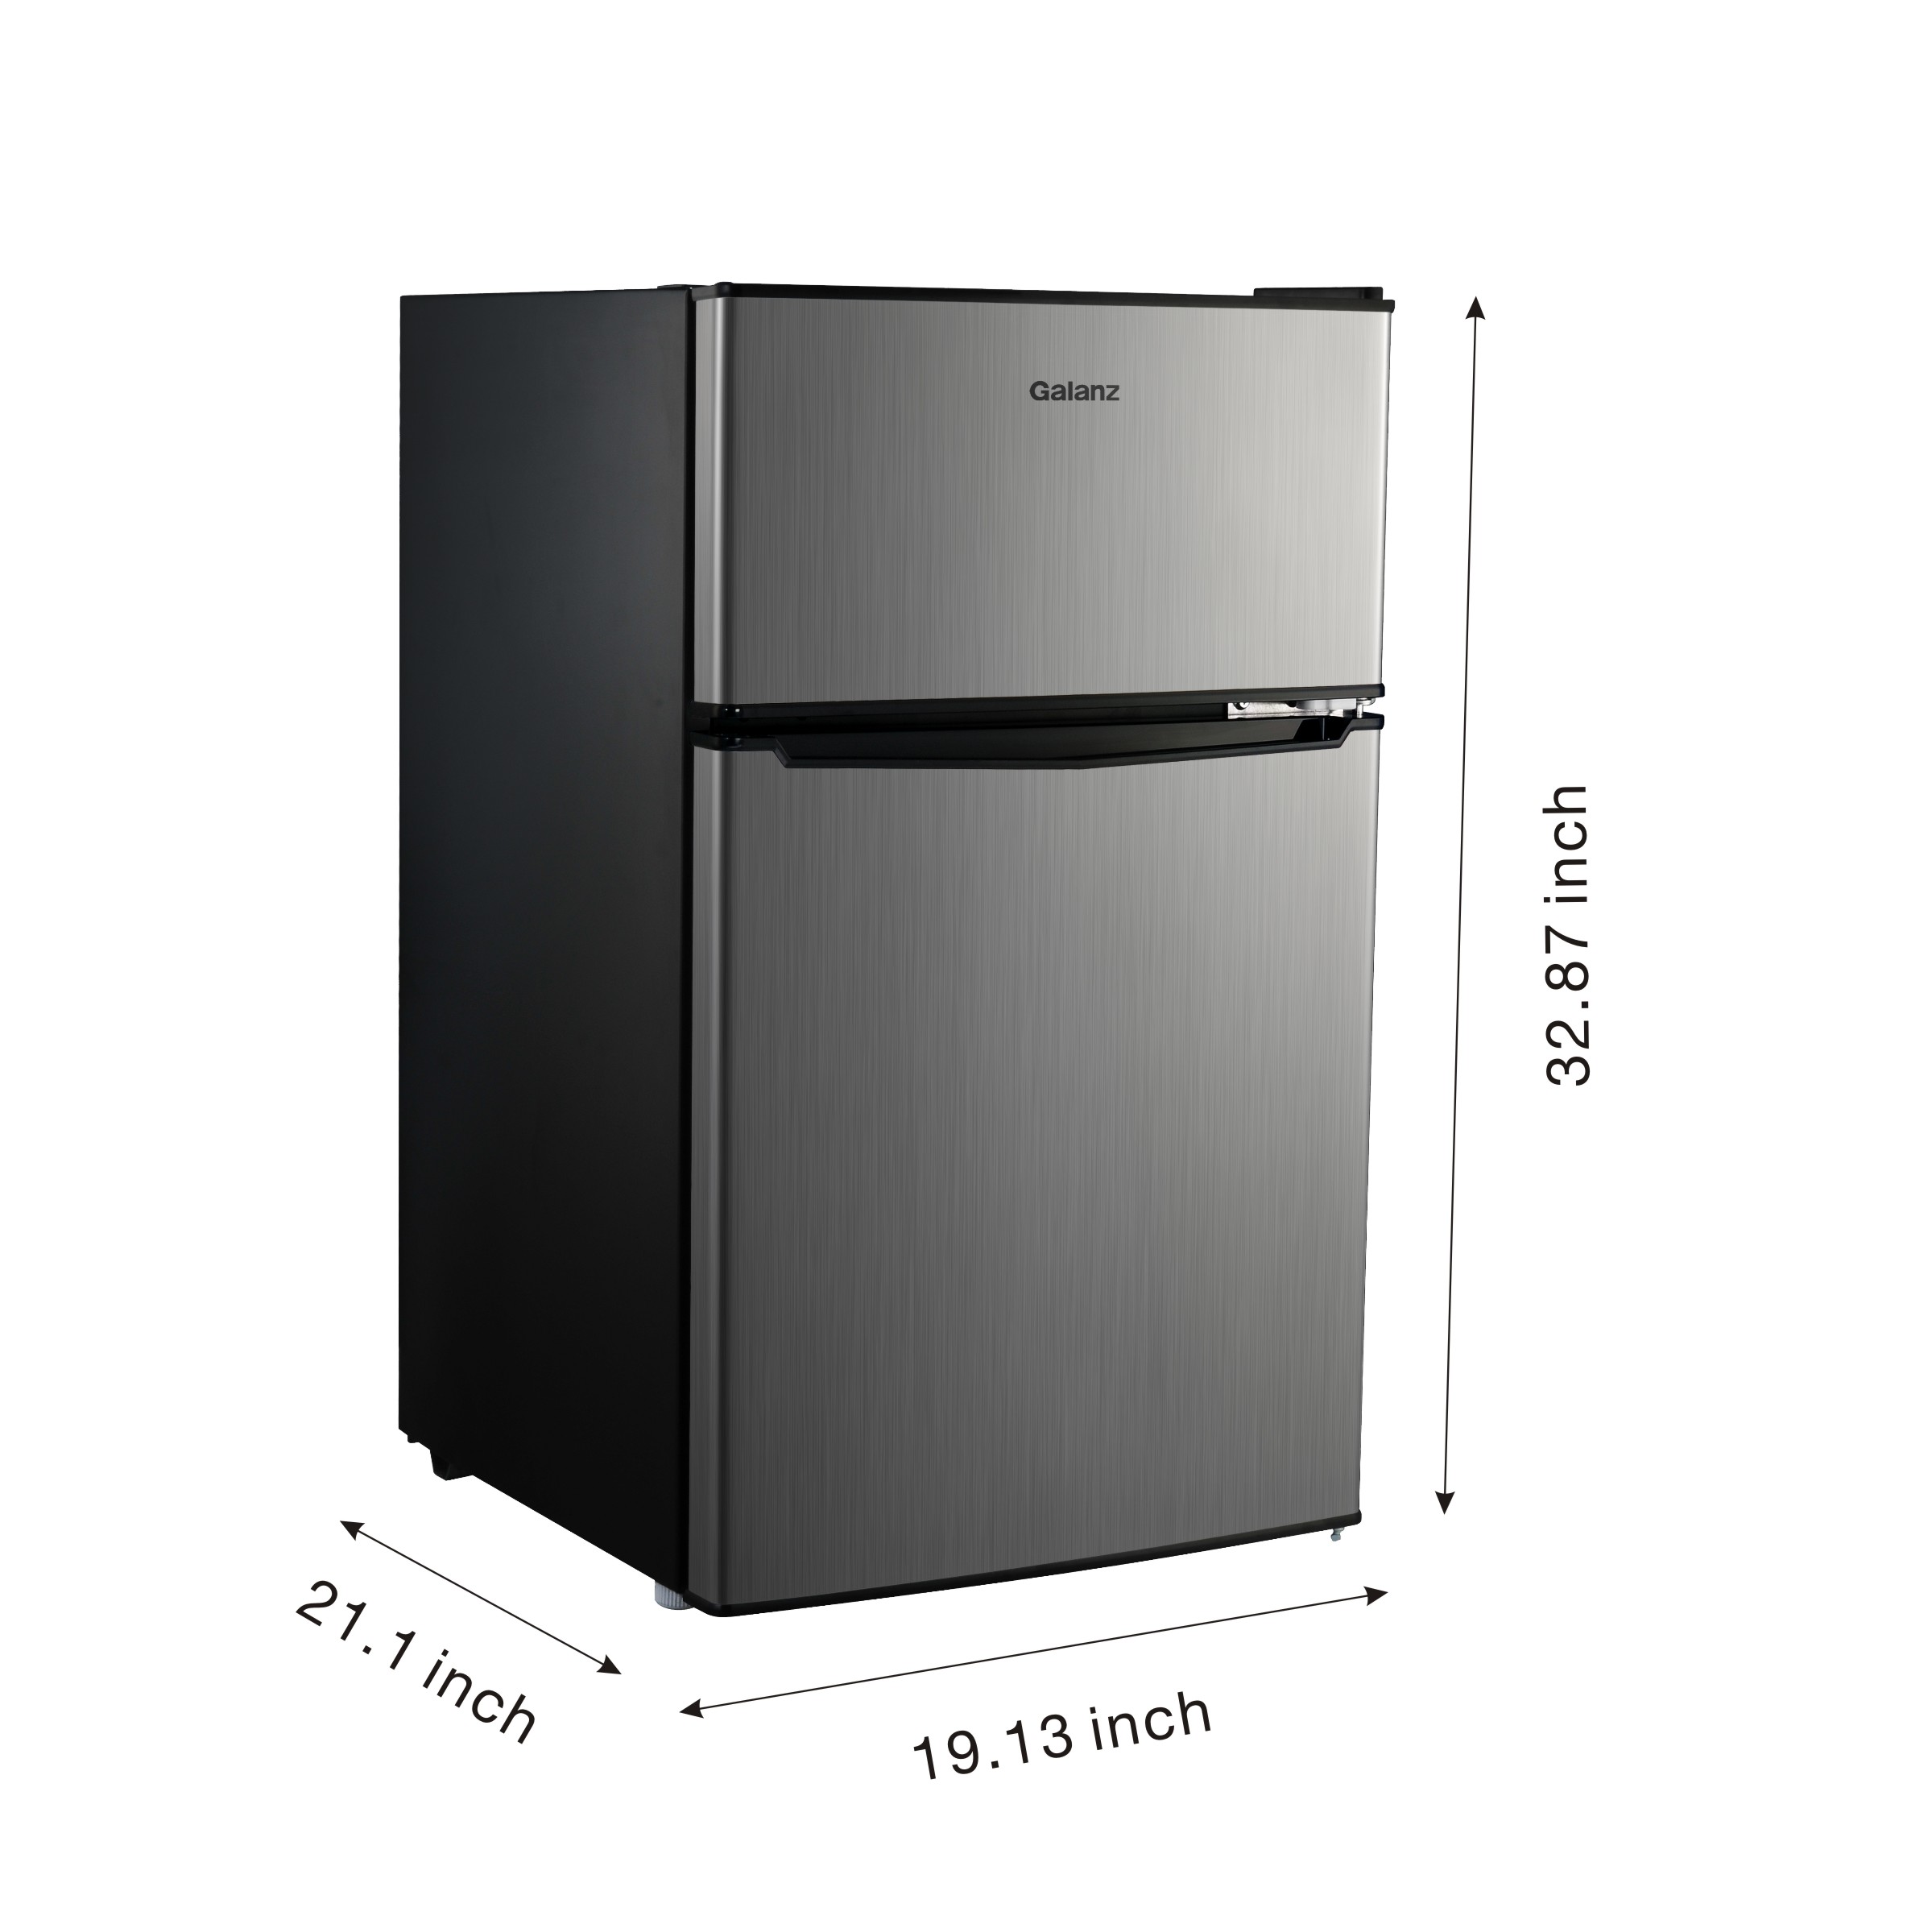 Galanz 3.1 Cu ft Two Door Mini Fridge with Freezer Estar GL31S5E, Stainless - image 3 of 6